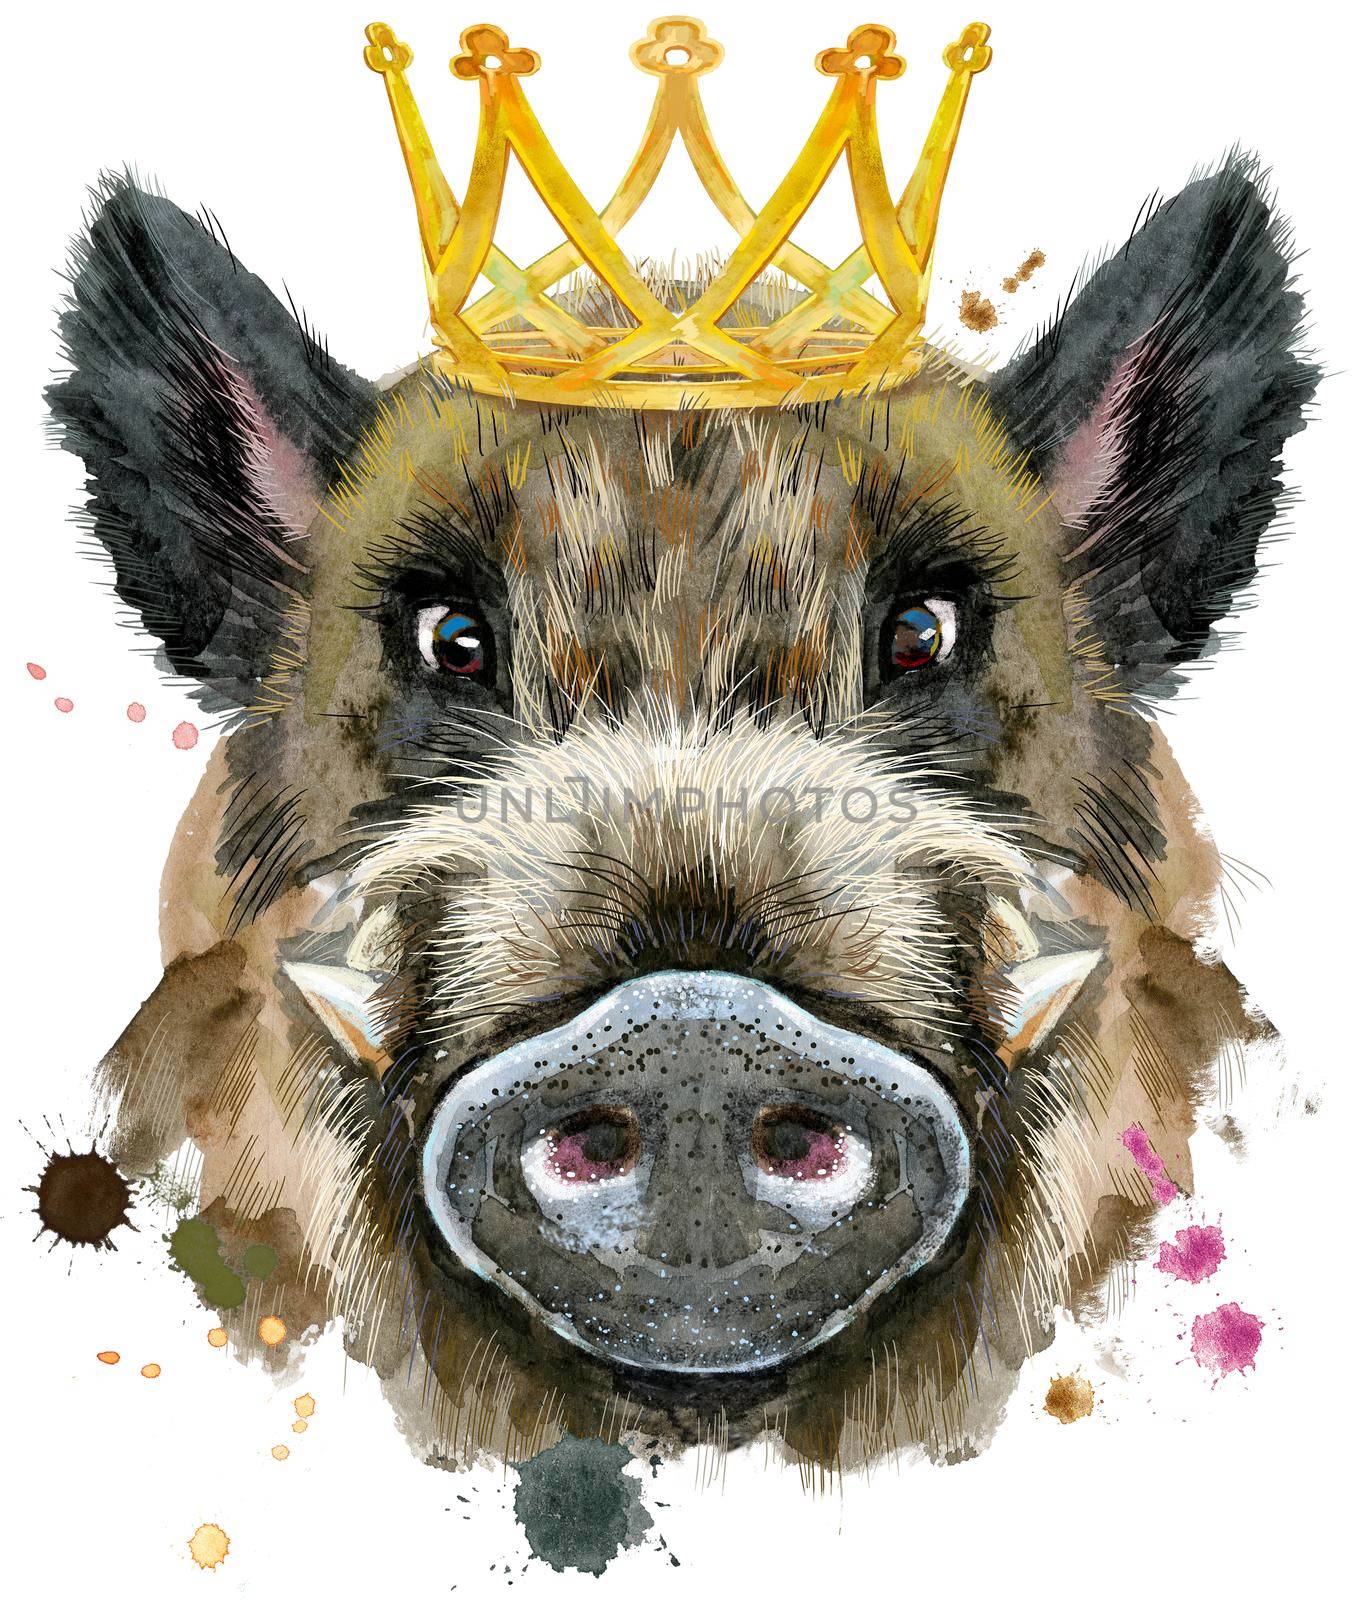 Watercolor portrait of wild boar with gold crown by NataOmsk